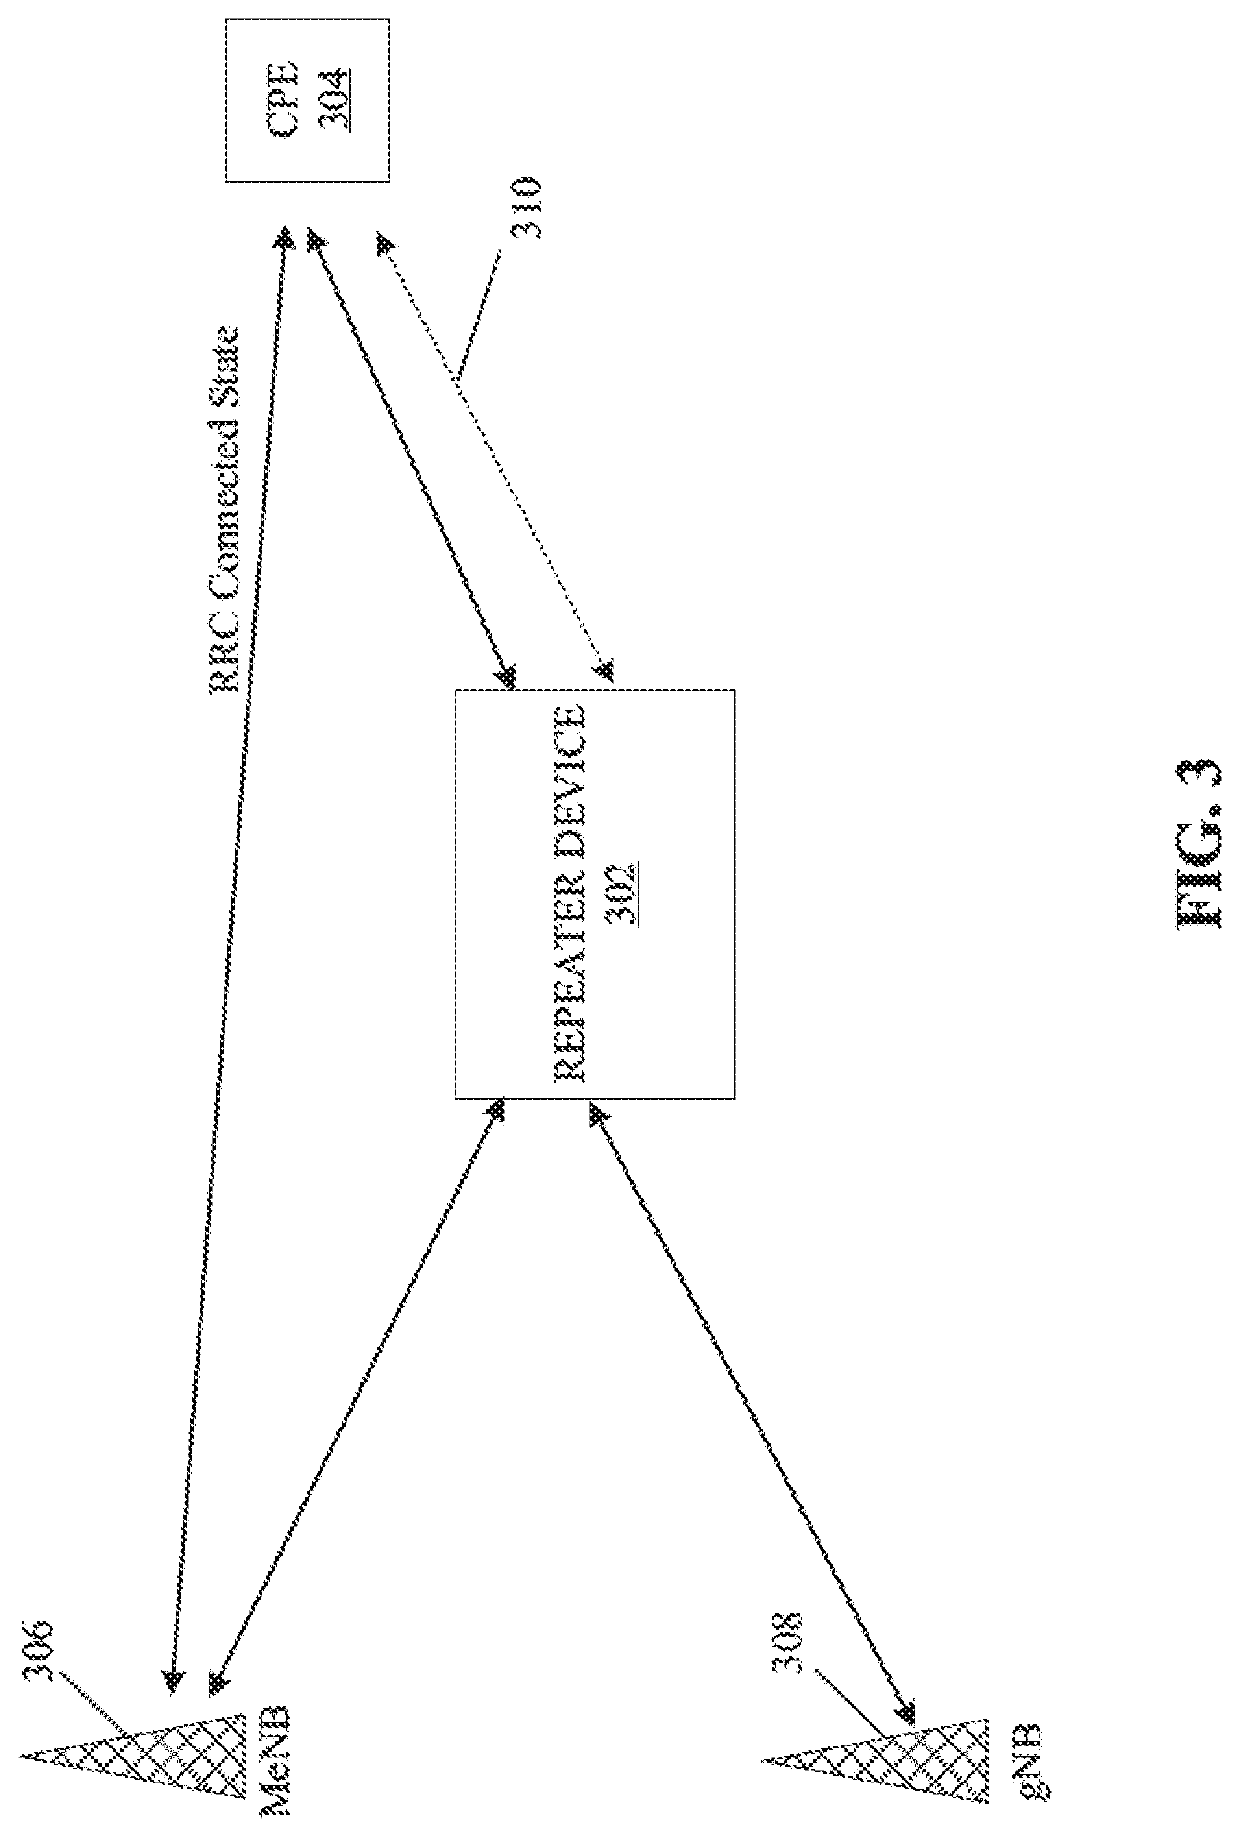 Communication device and method for low-latency initial access to non-standalone 5g new radio network